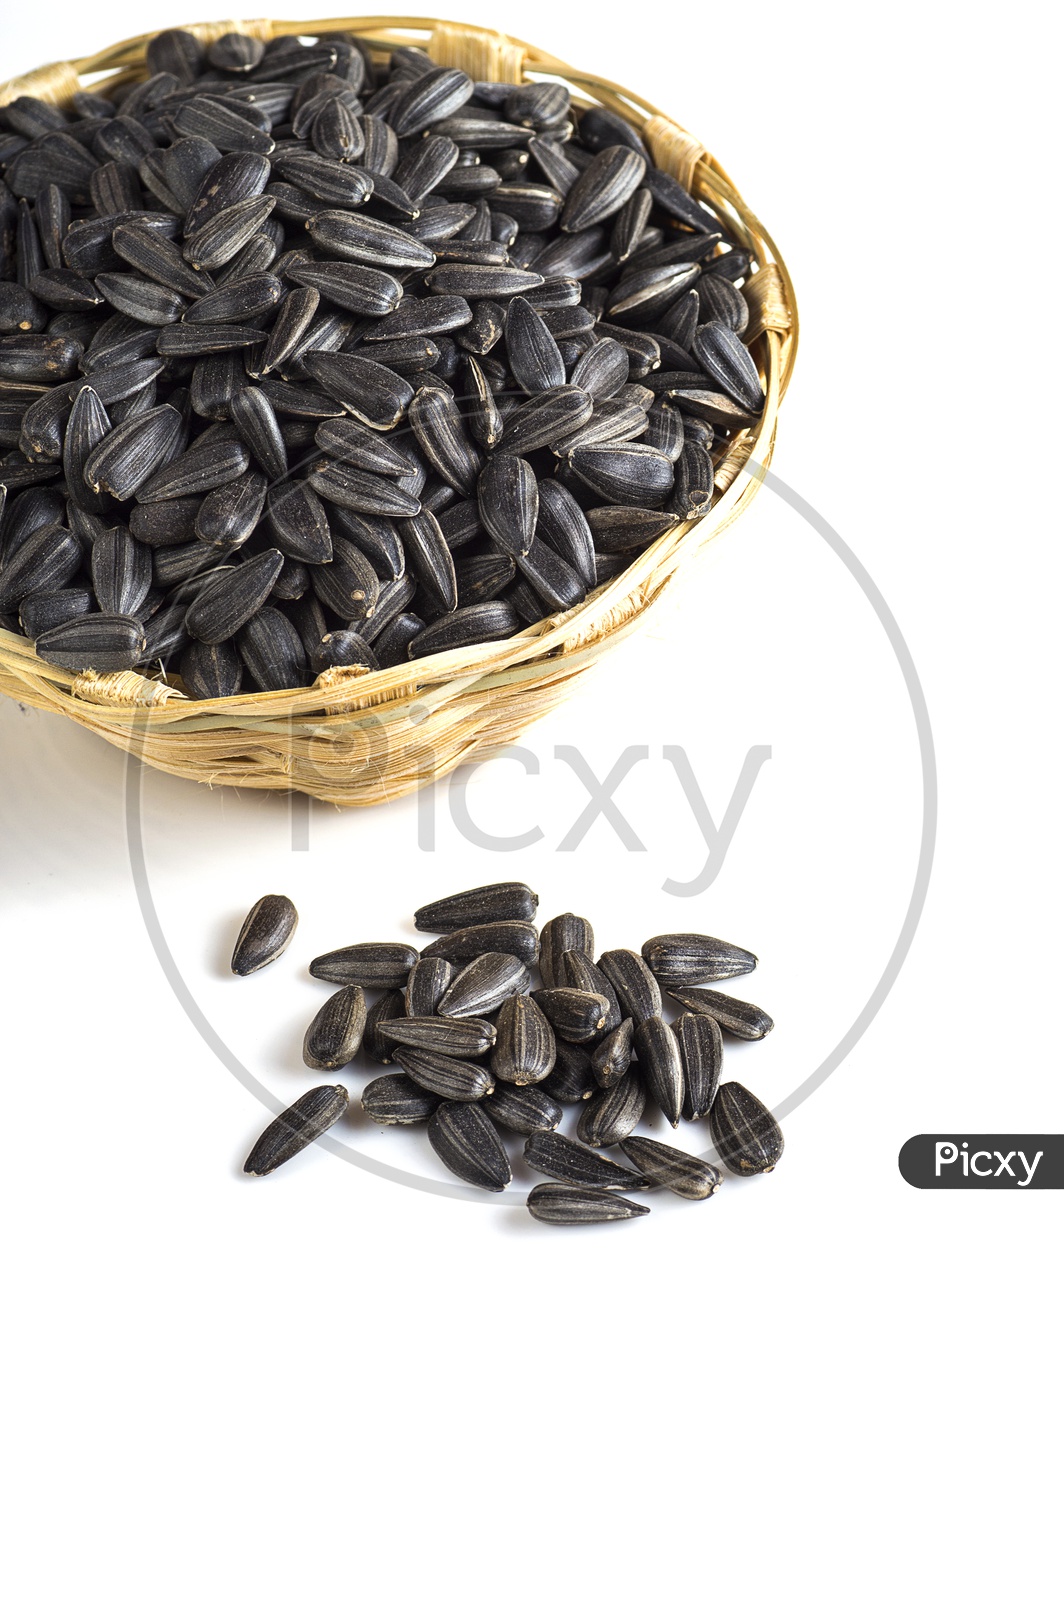 Sunflower seeds in a basket on a isolated white background